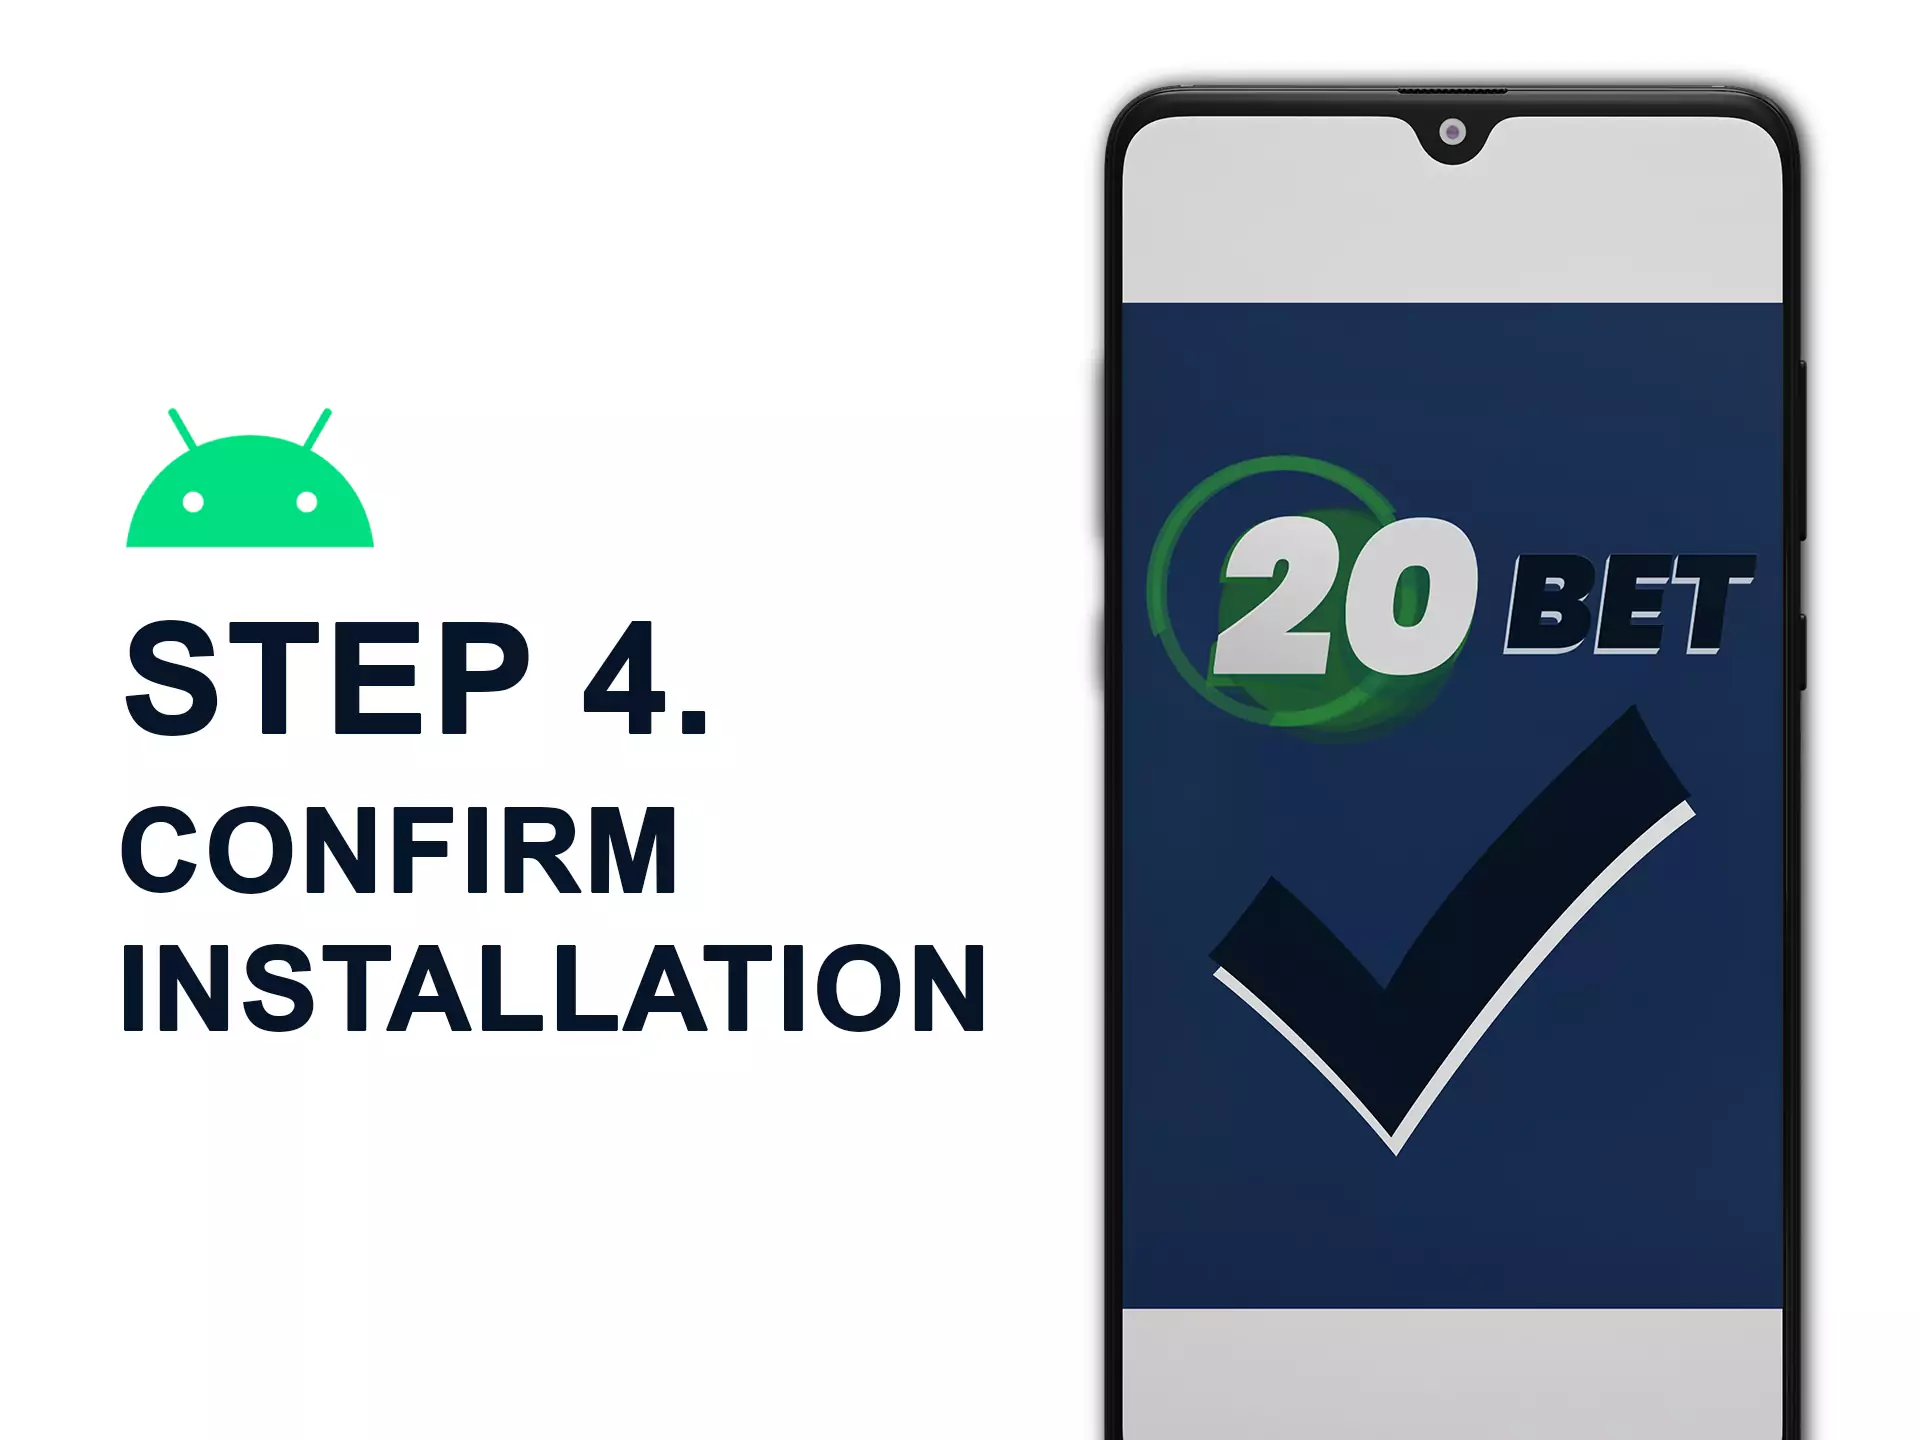 Once the installation is complete, you can start using the app.